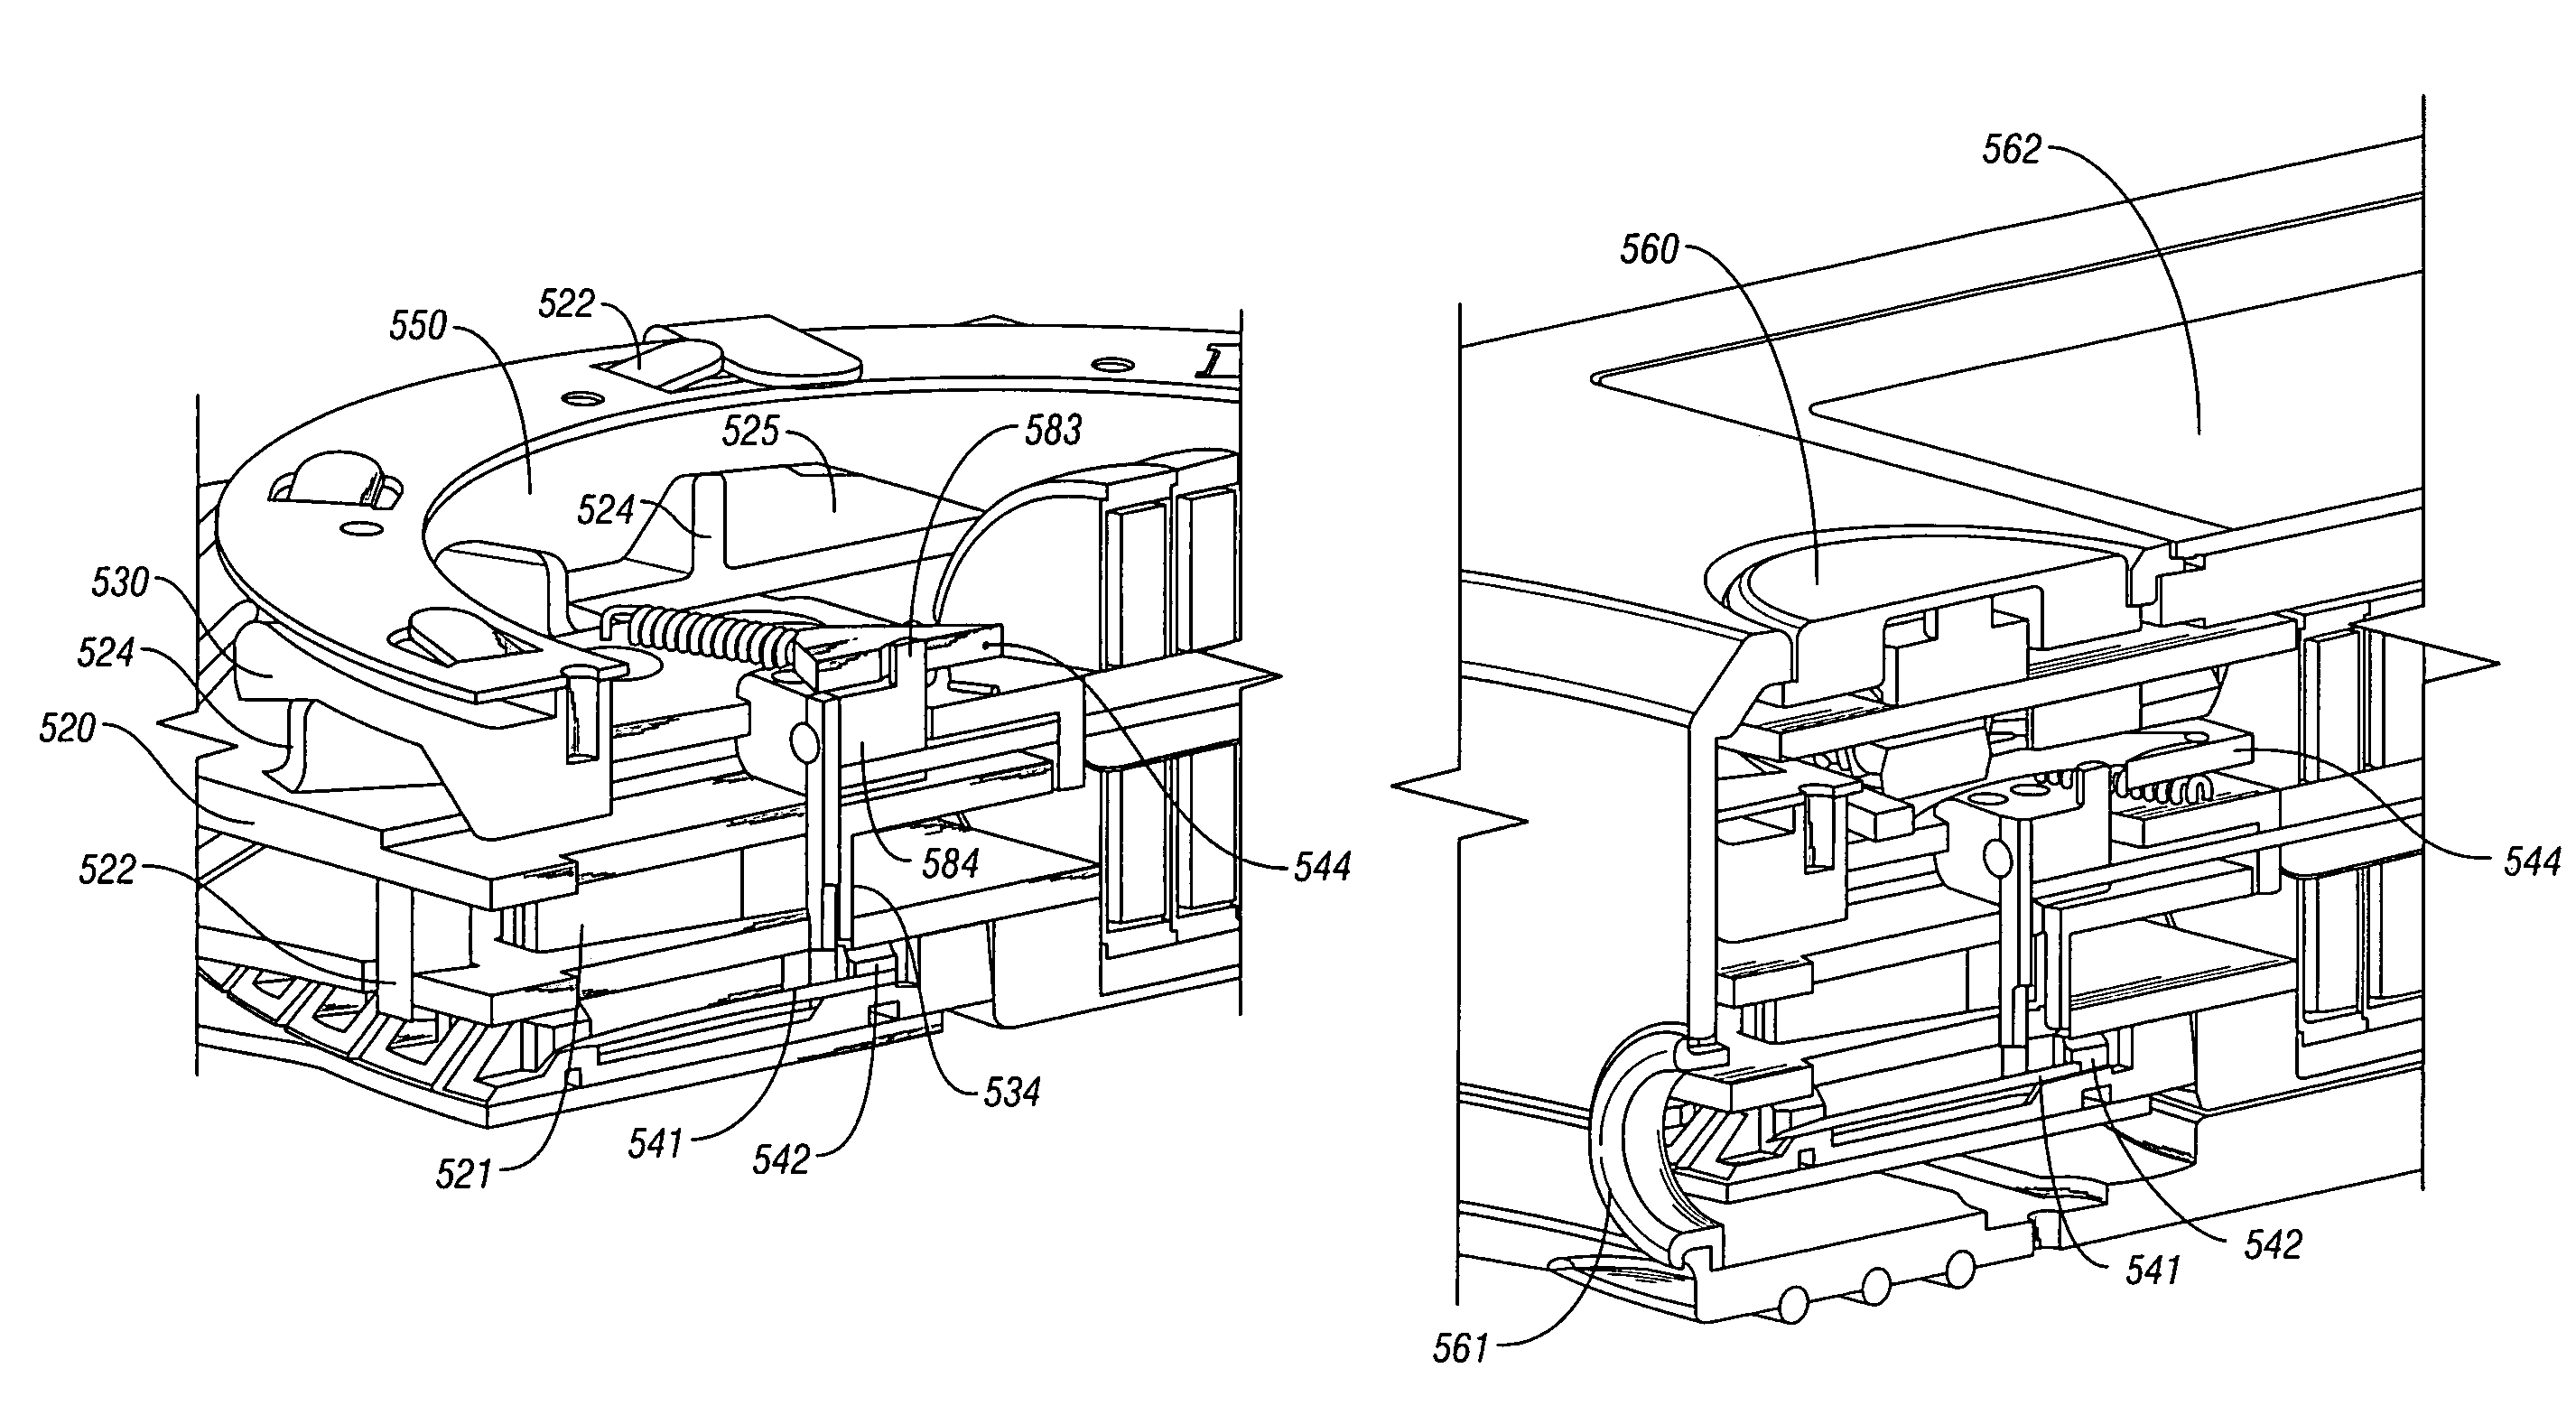 Method and apparatus for a multi-use body fluid sampling device with sterility barrier release